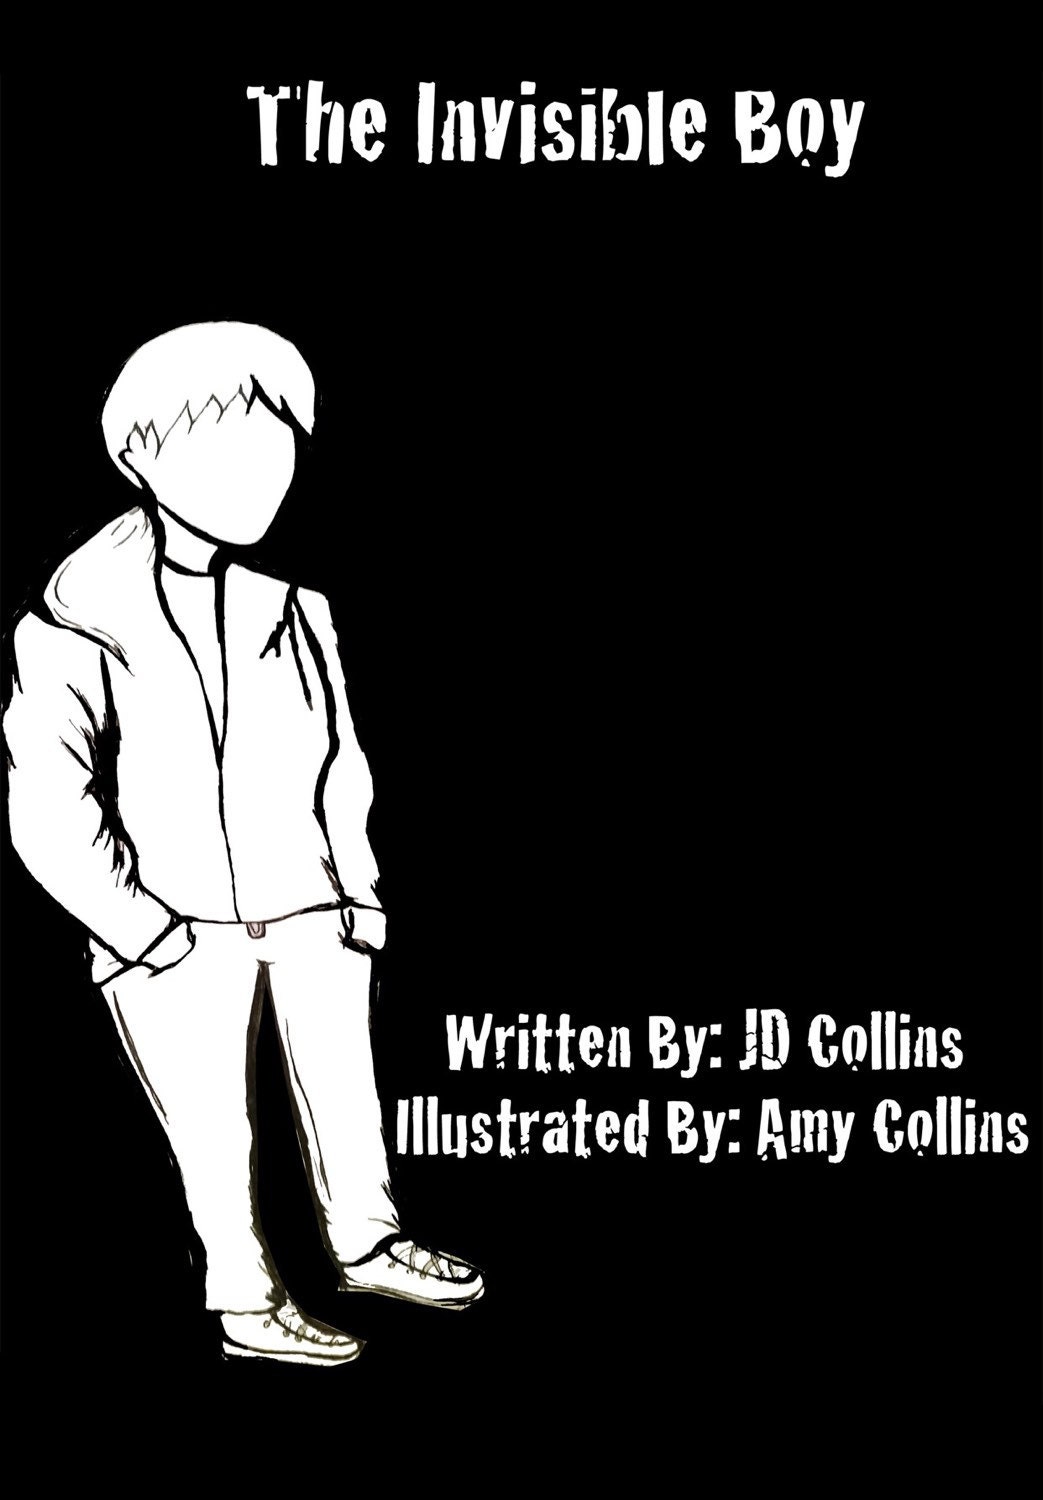 The Invisible Boy Short Story/Zine by WhimsyandWonderCP on Etsy